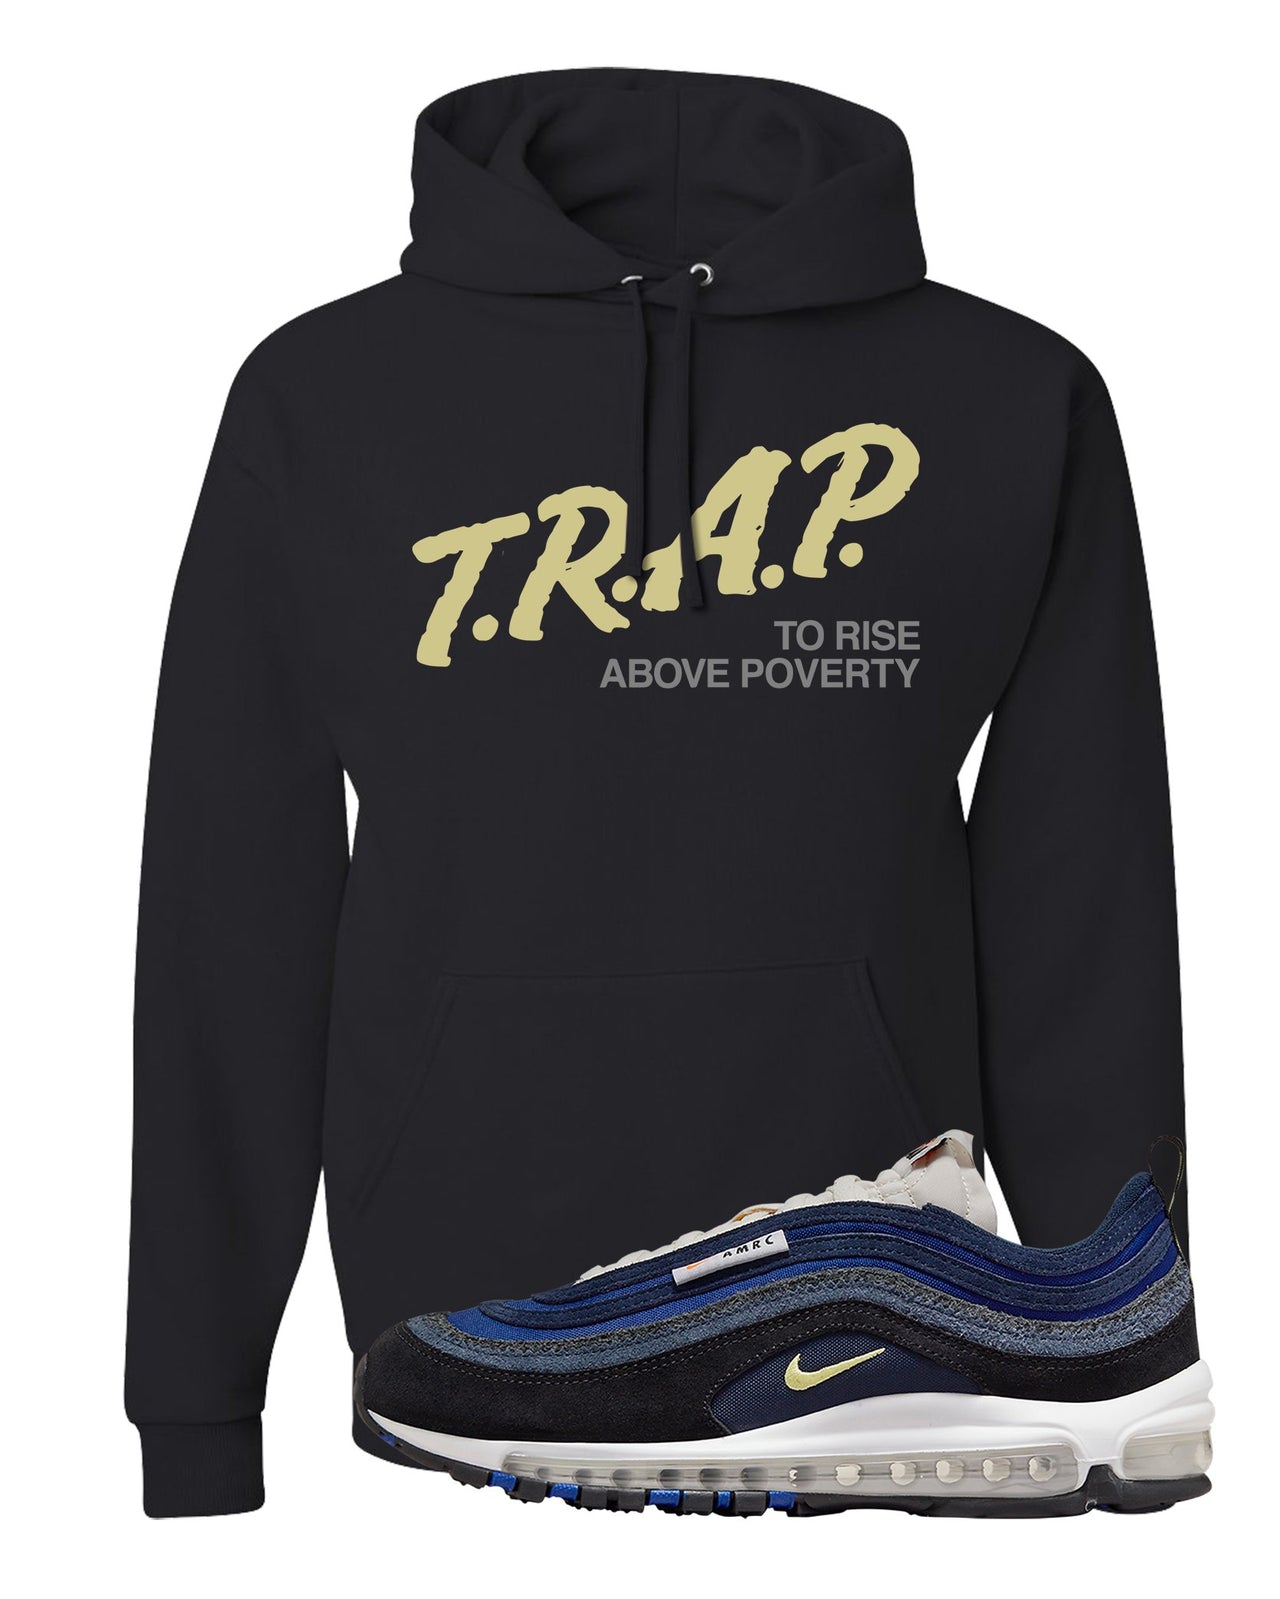 Navy Suede AMRC 97s Hoodie | Trap To Rise Above Poverty, Black